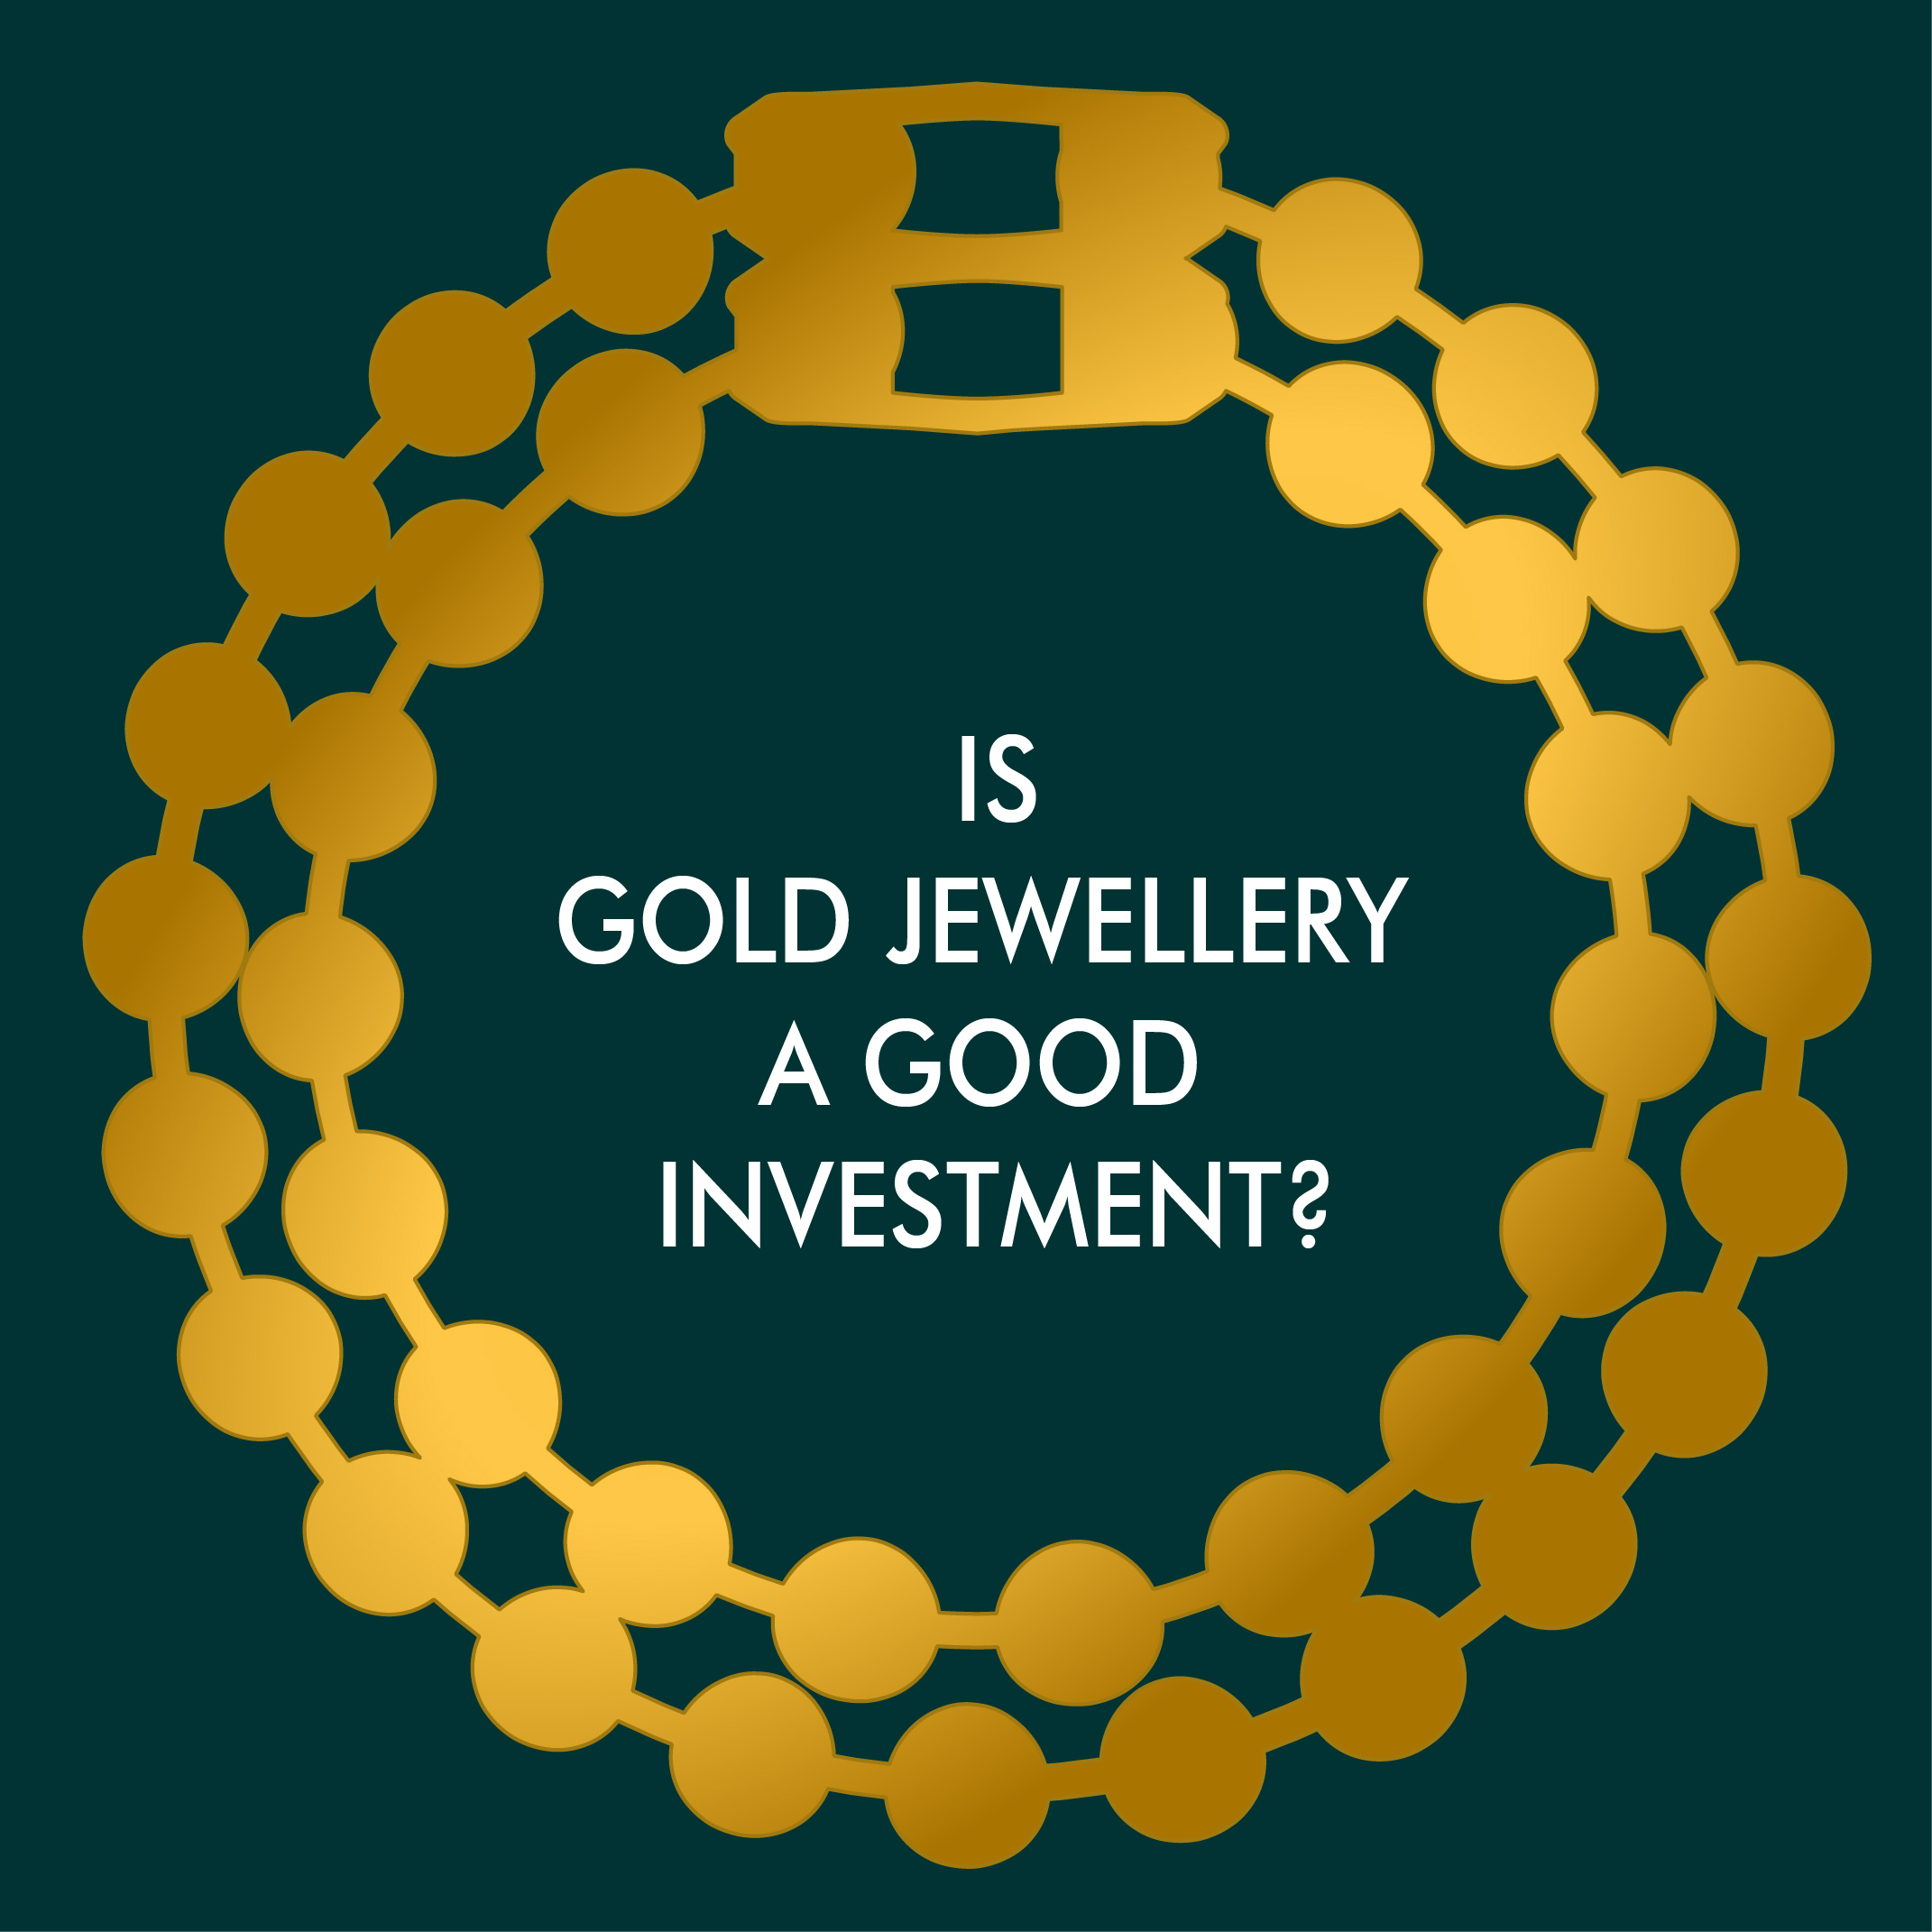 Is gold jewellery a good investment